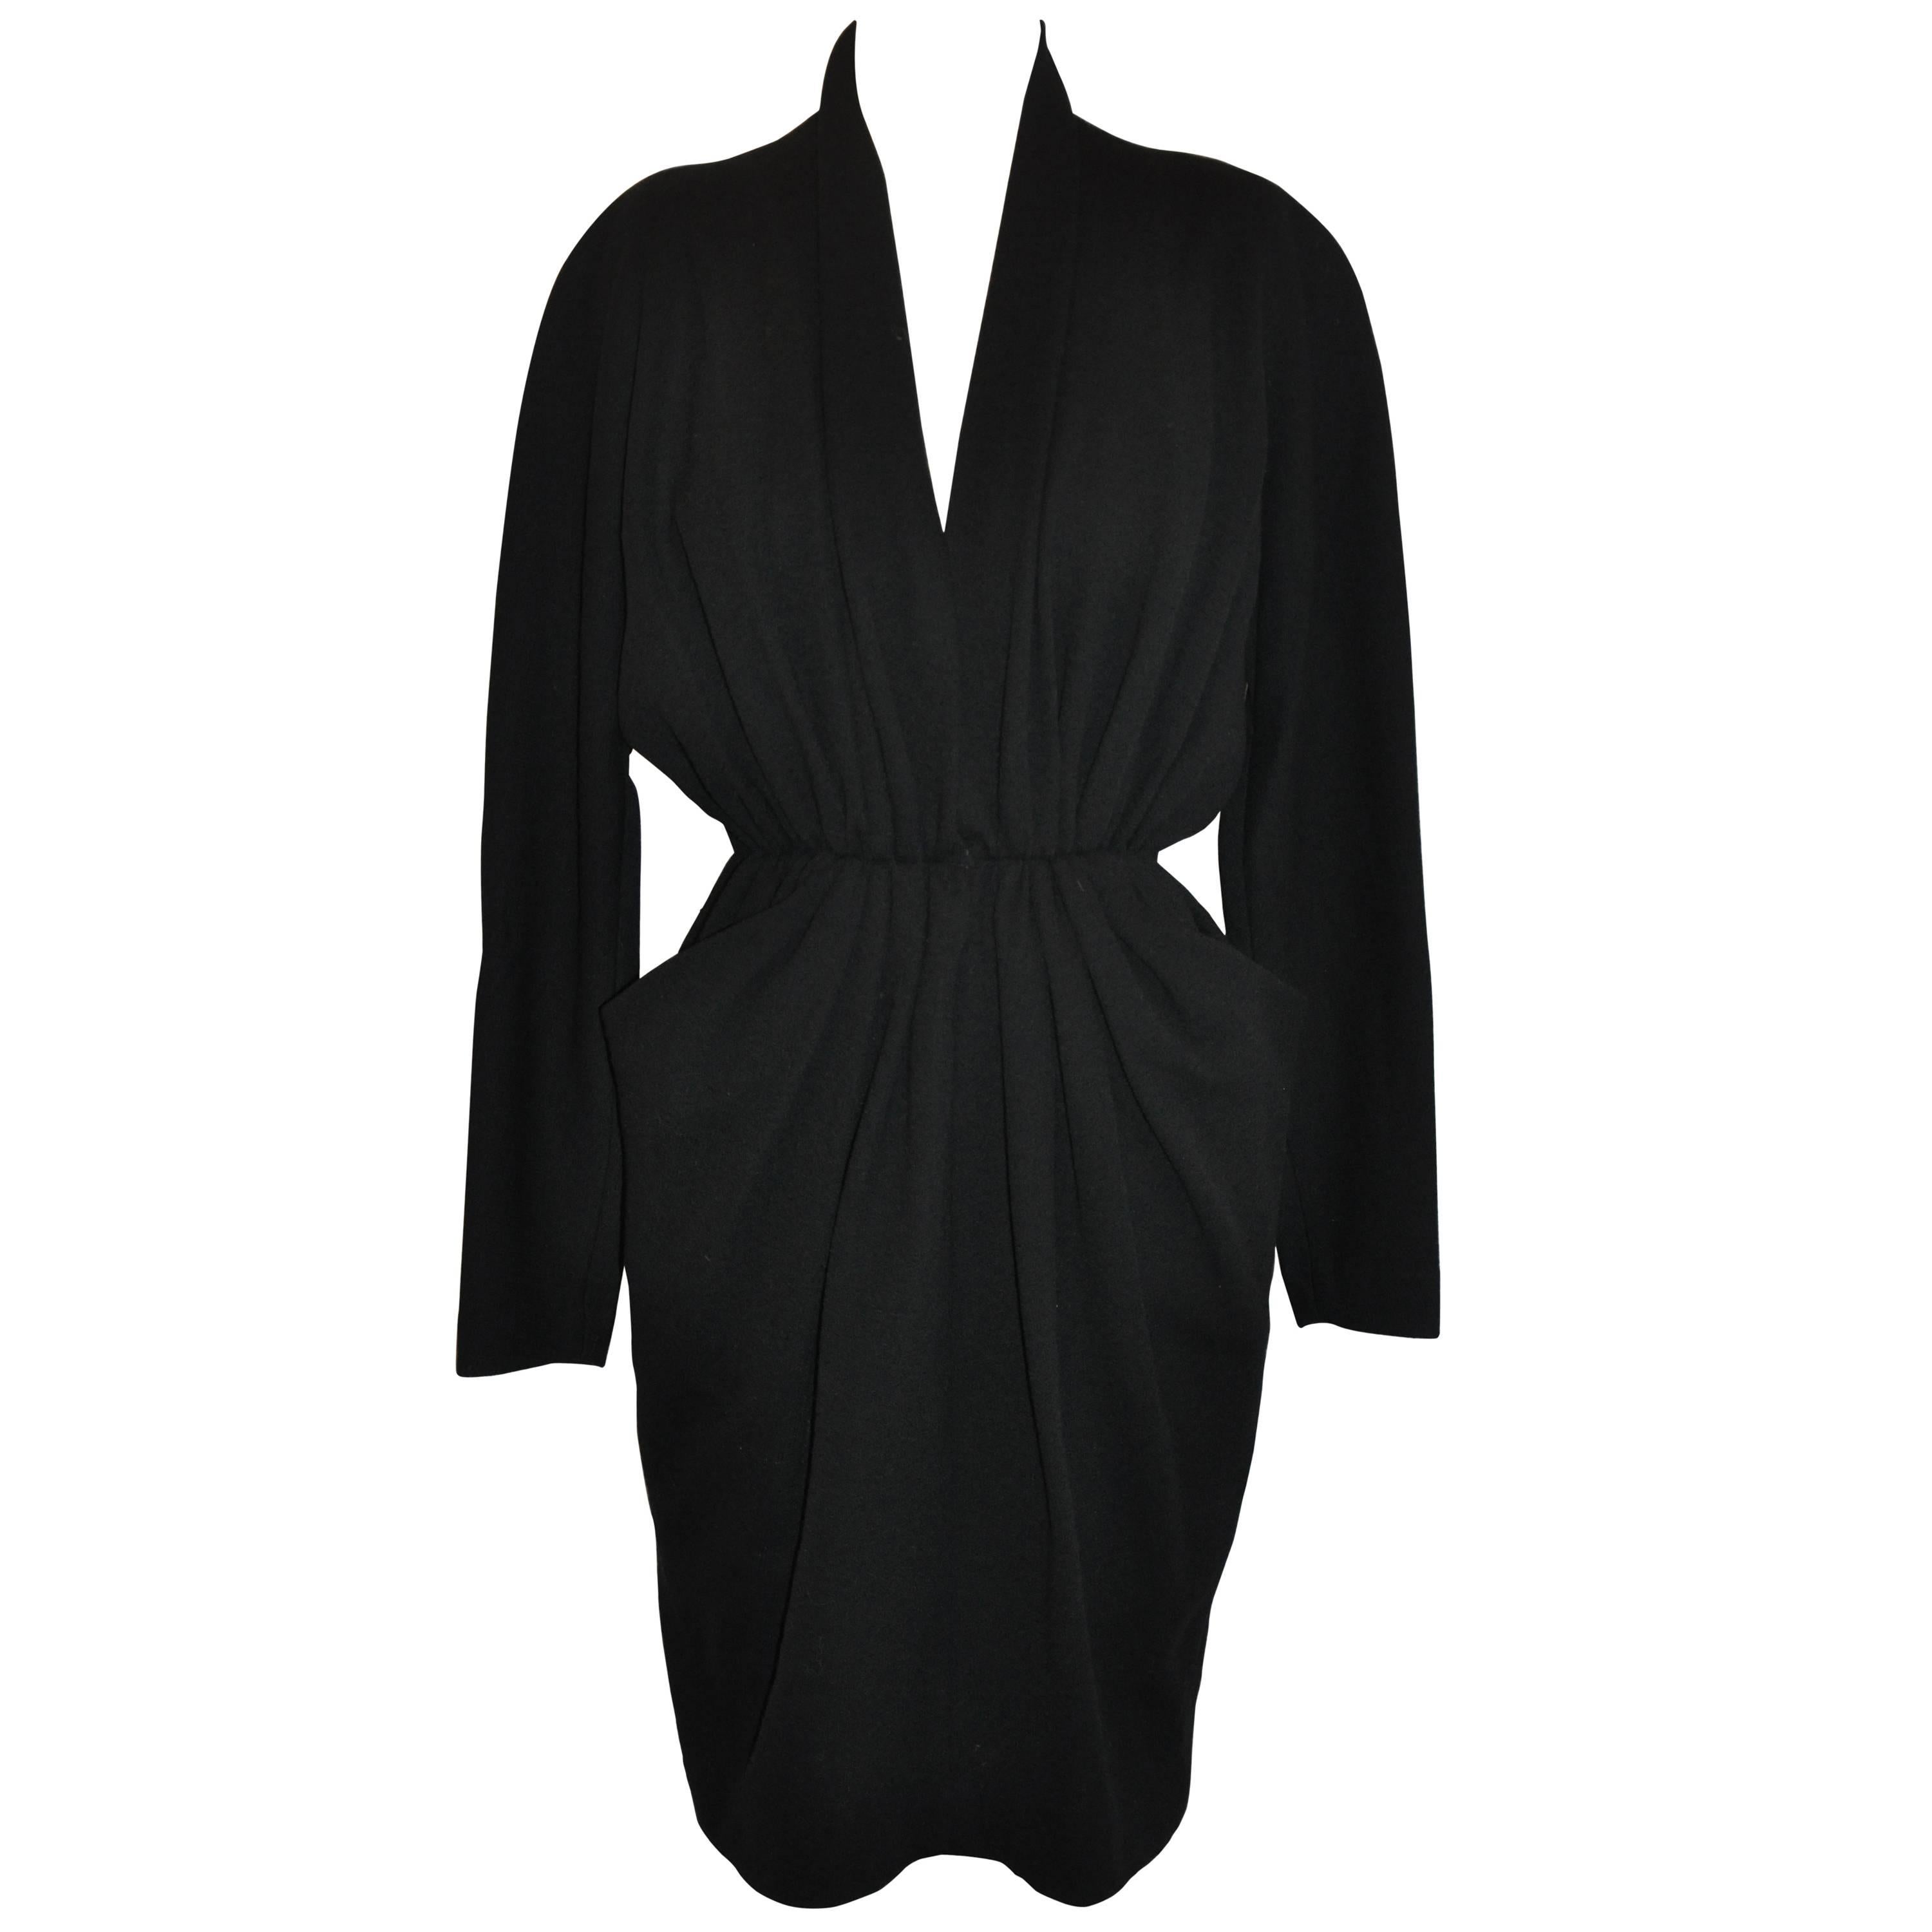 Donna Karan Iconic Signature "Sold Out" Black Wool Crepe Jersey Dress